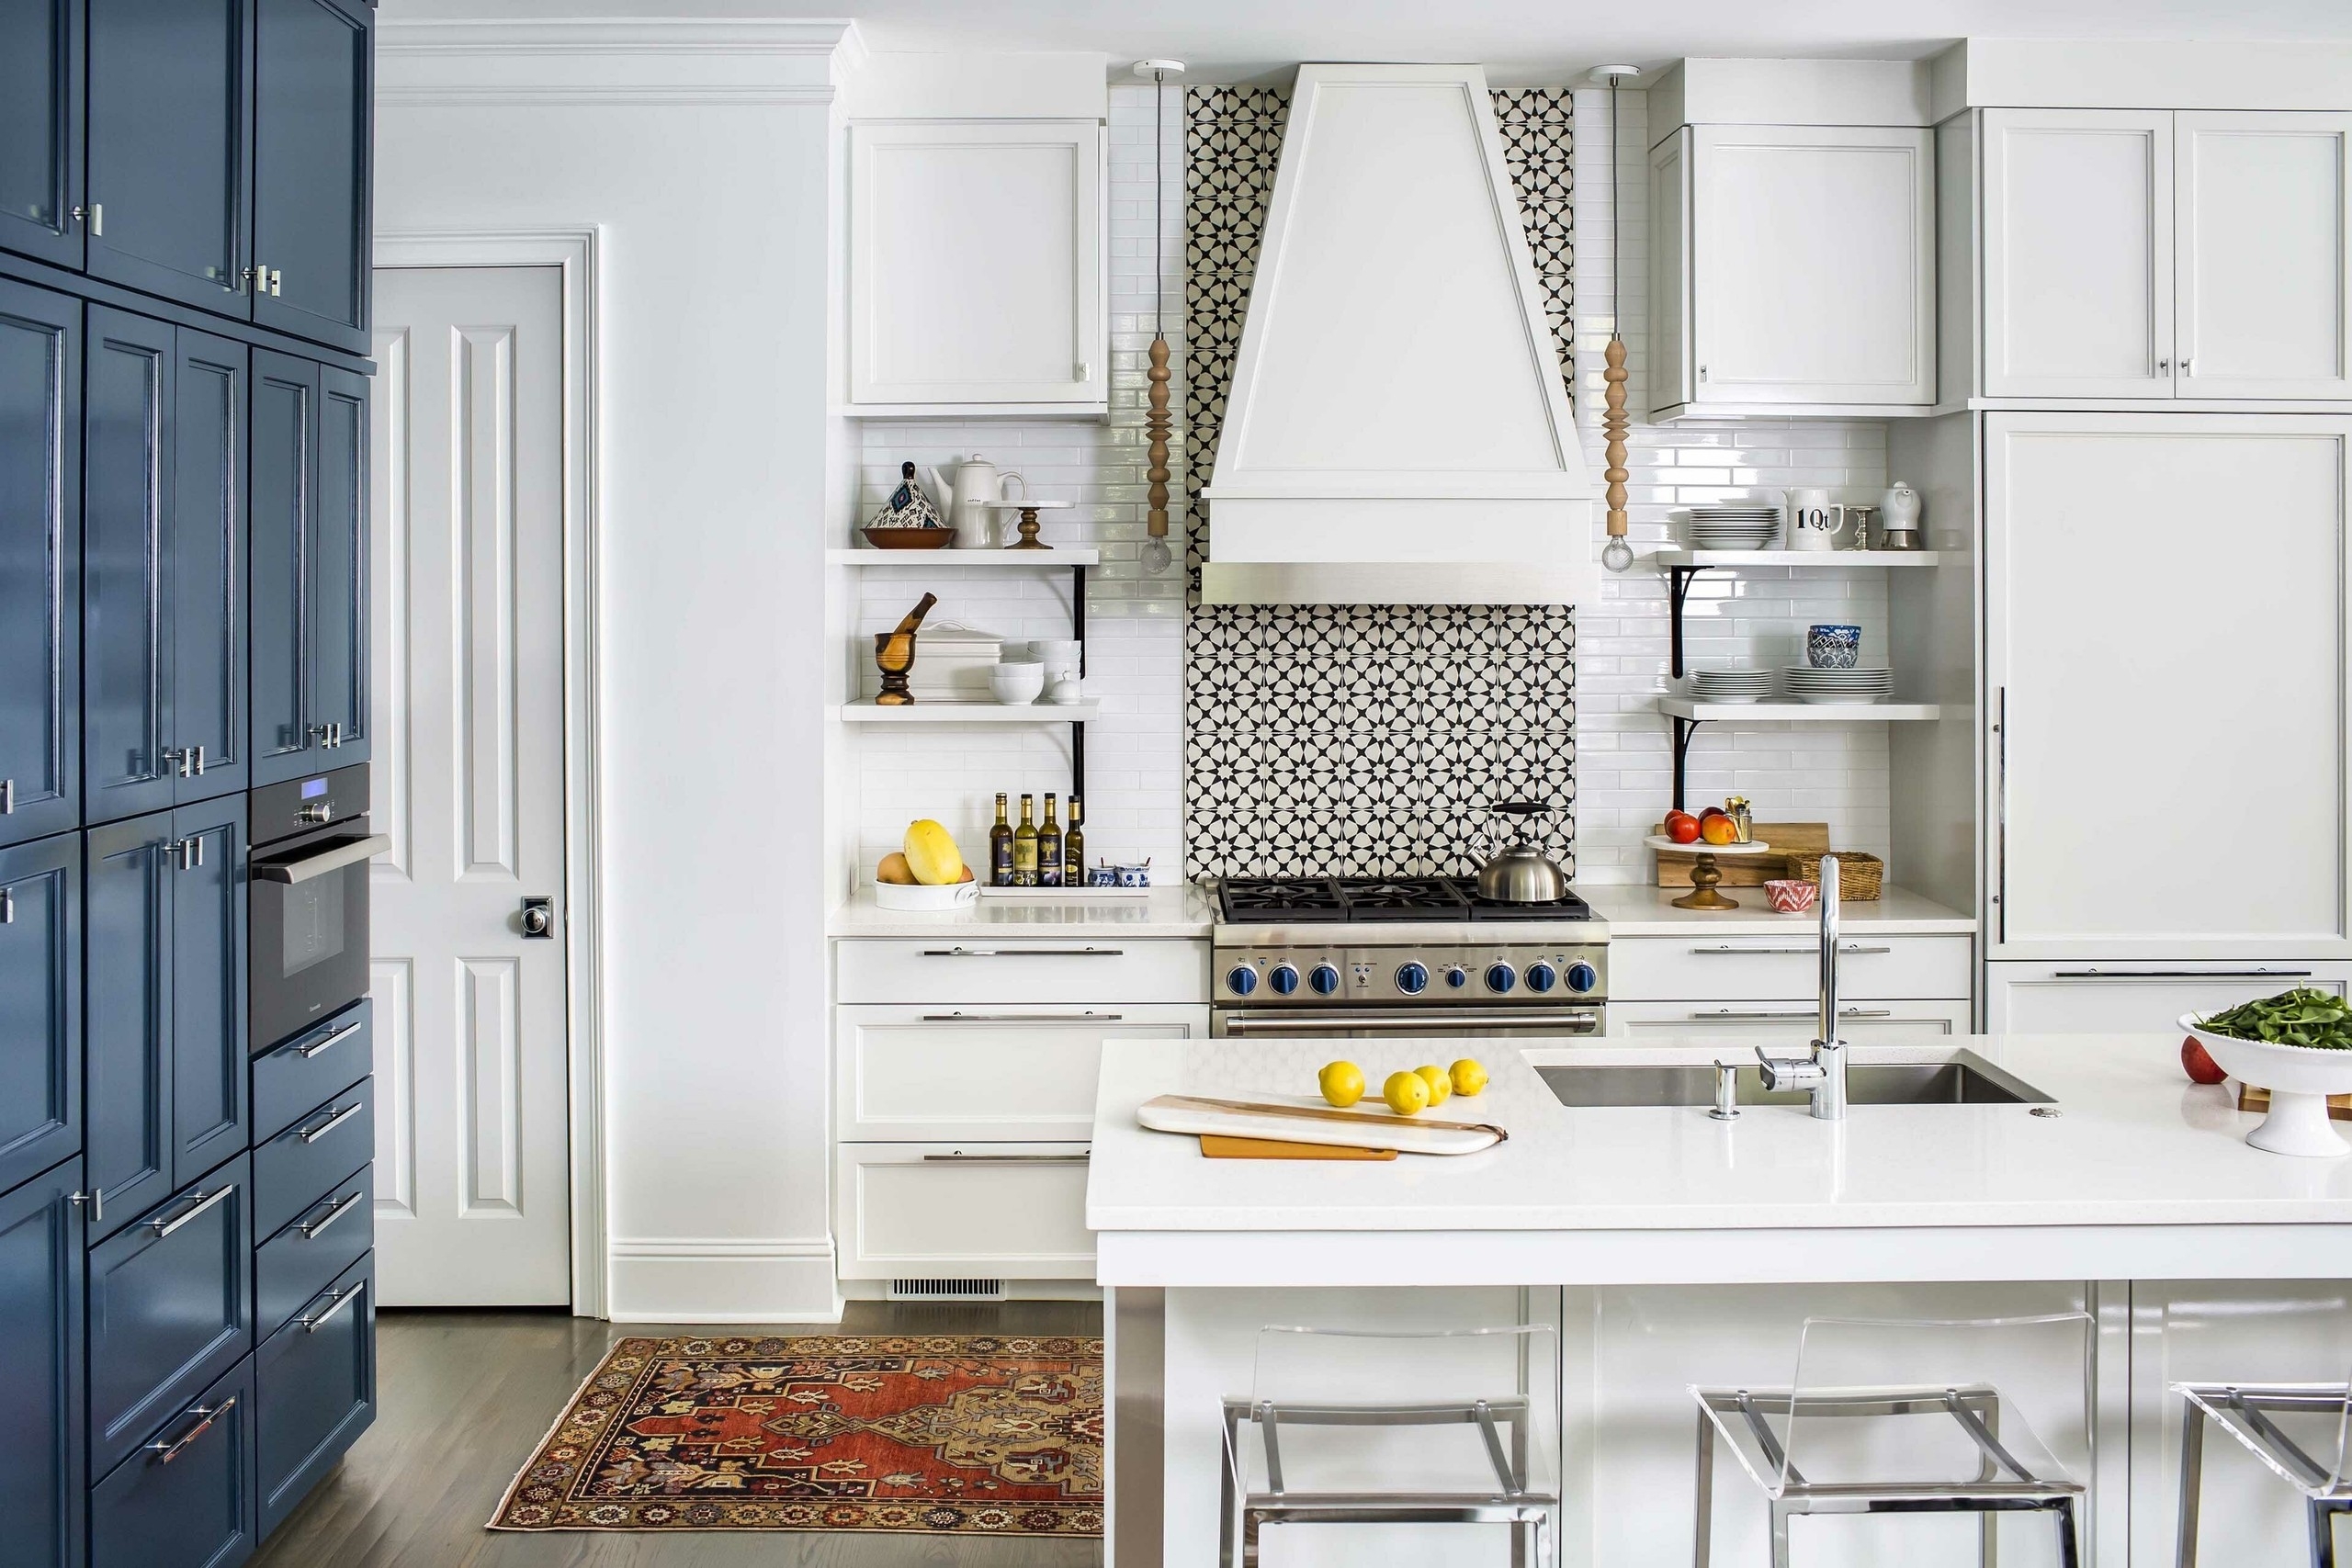 12 Space Saving Ideas For Small Kitchens 